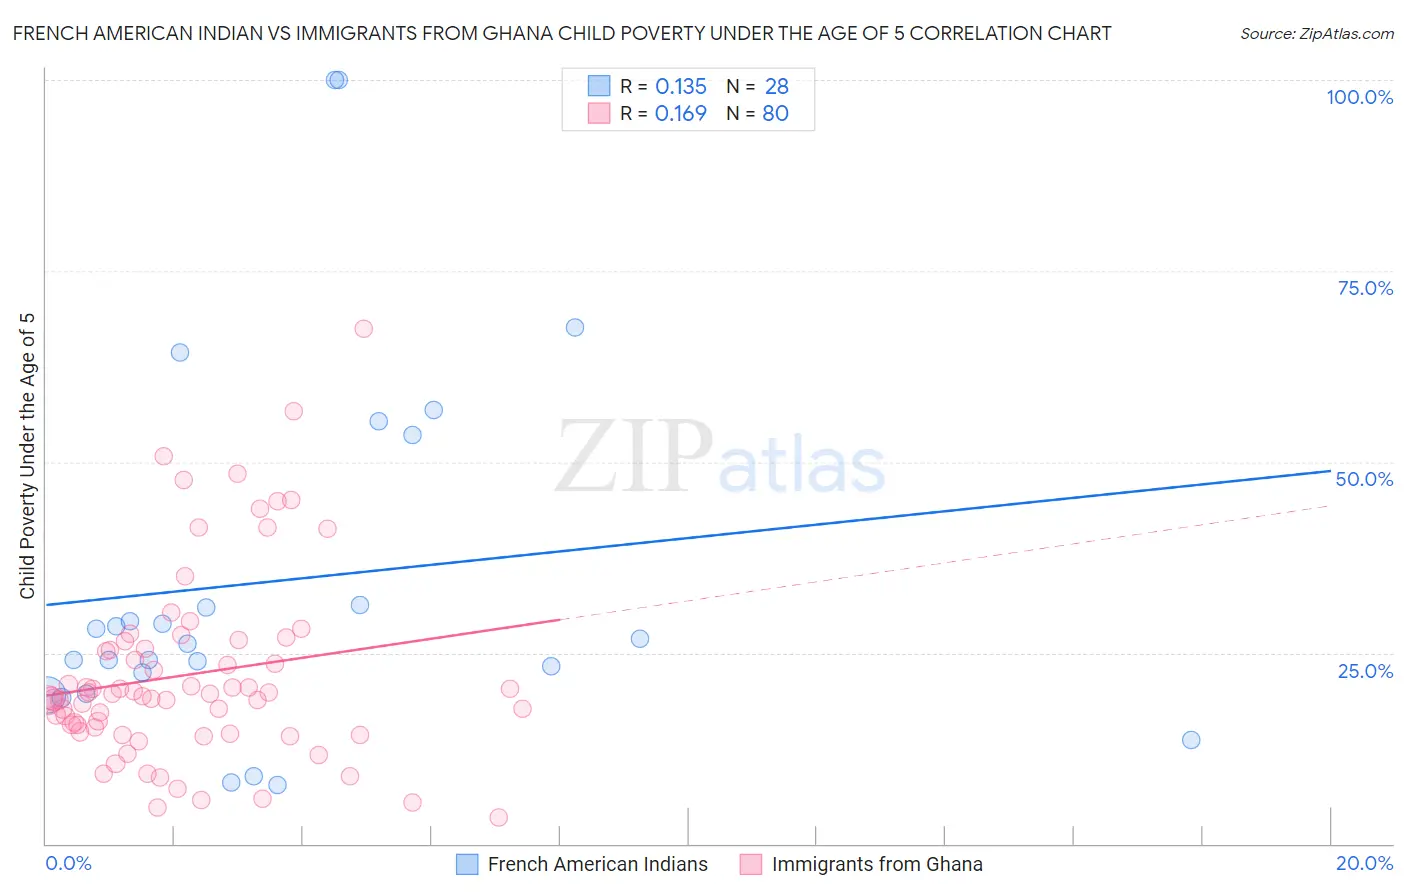 French American Indian vs Immigrants from Ghana Child Poverty Under the Age of 5